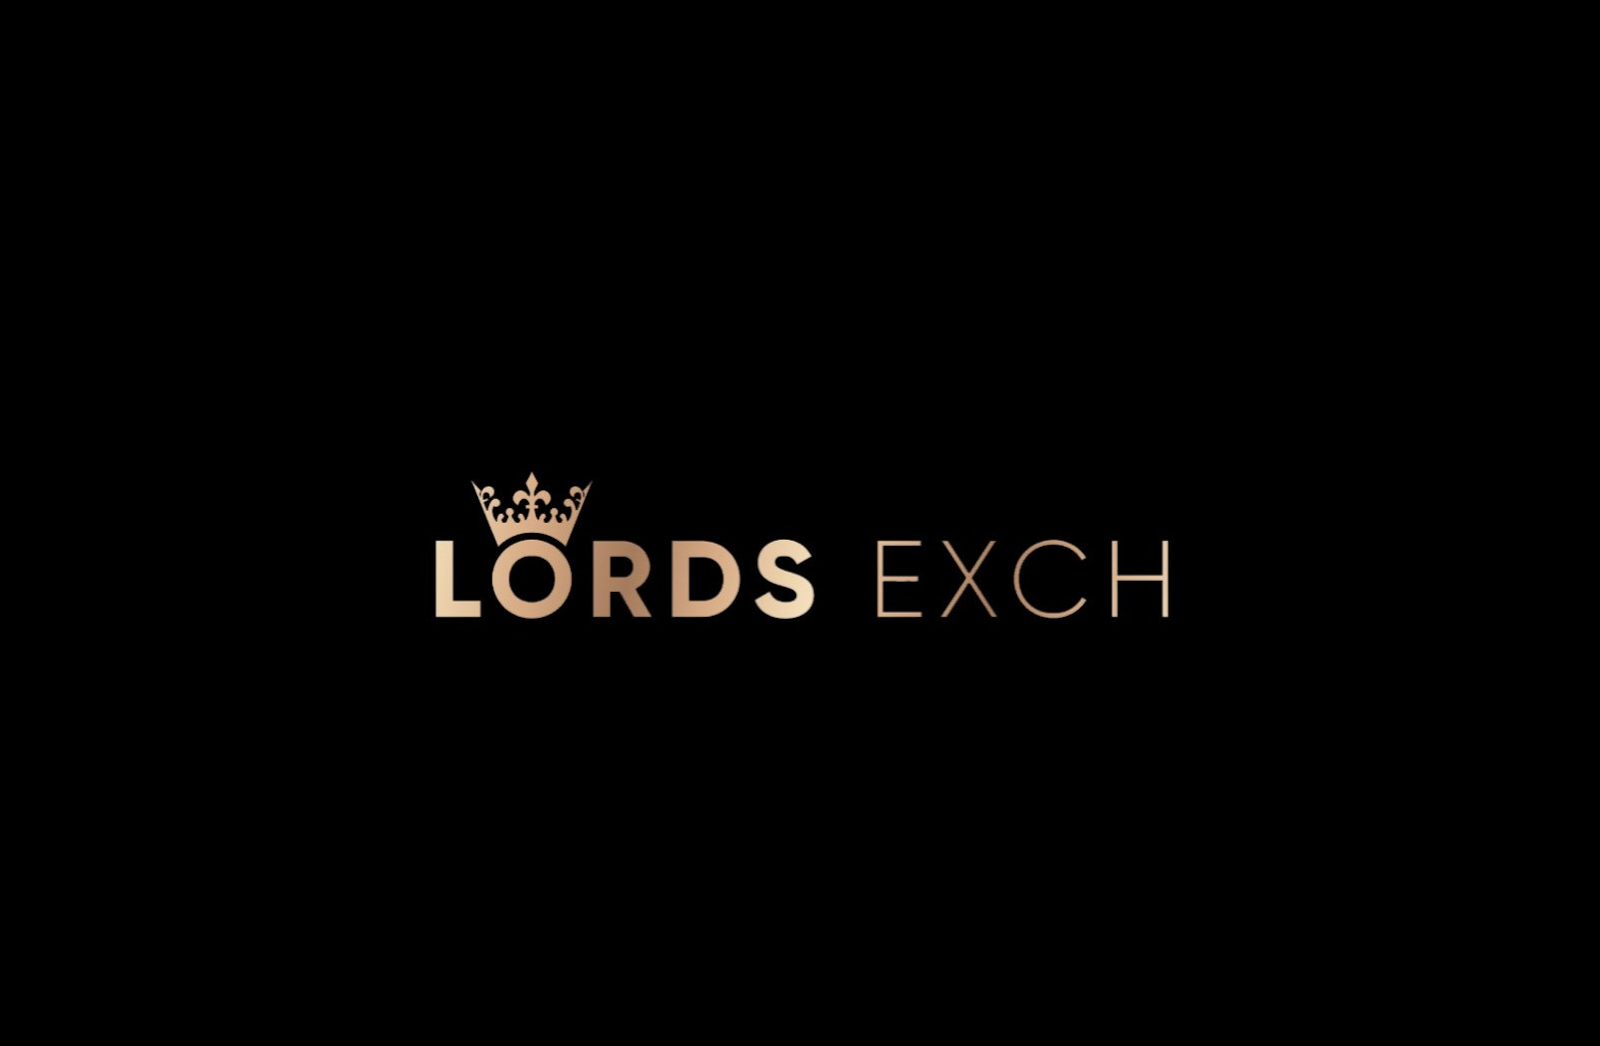 What is Lords Exchange?